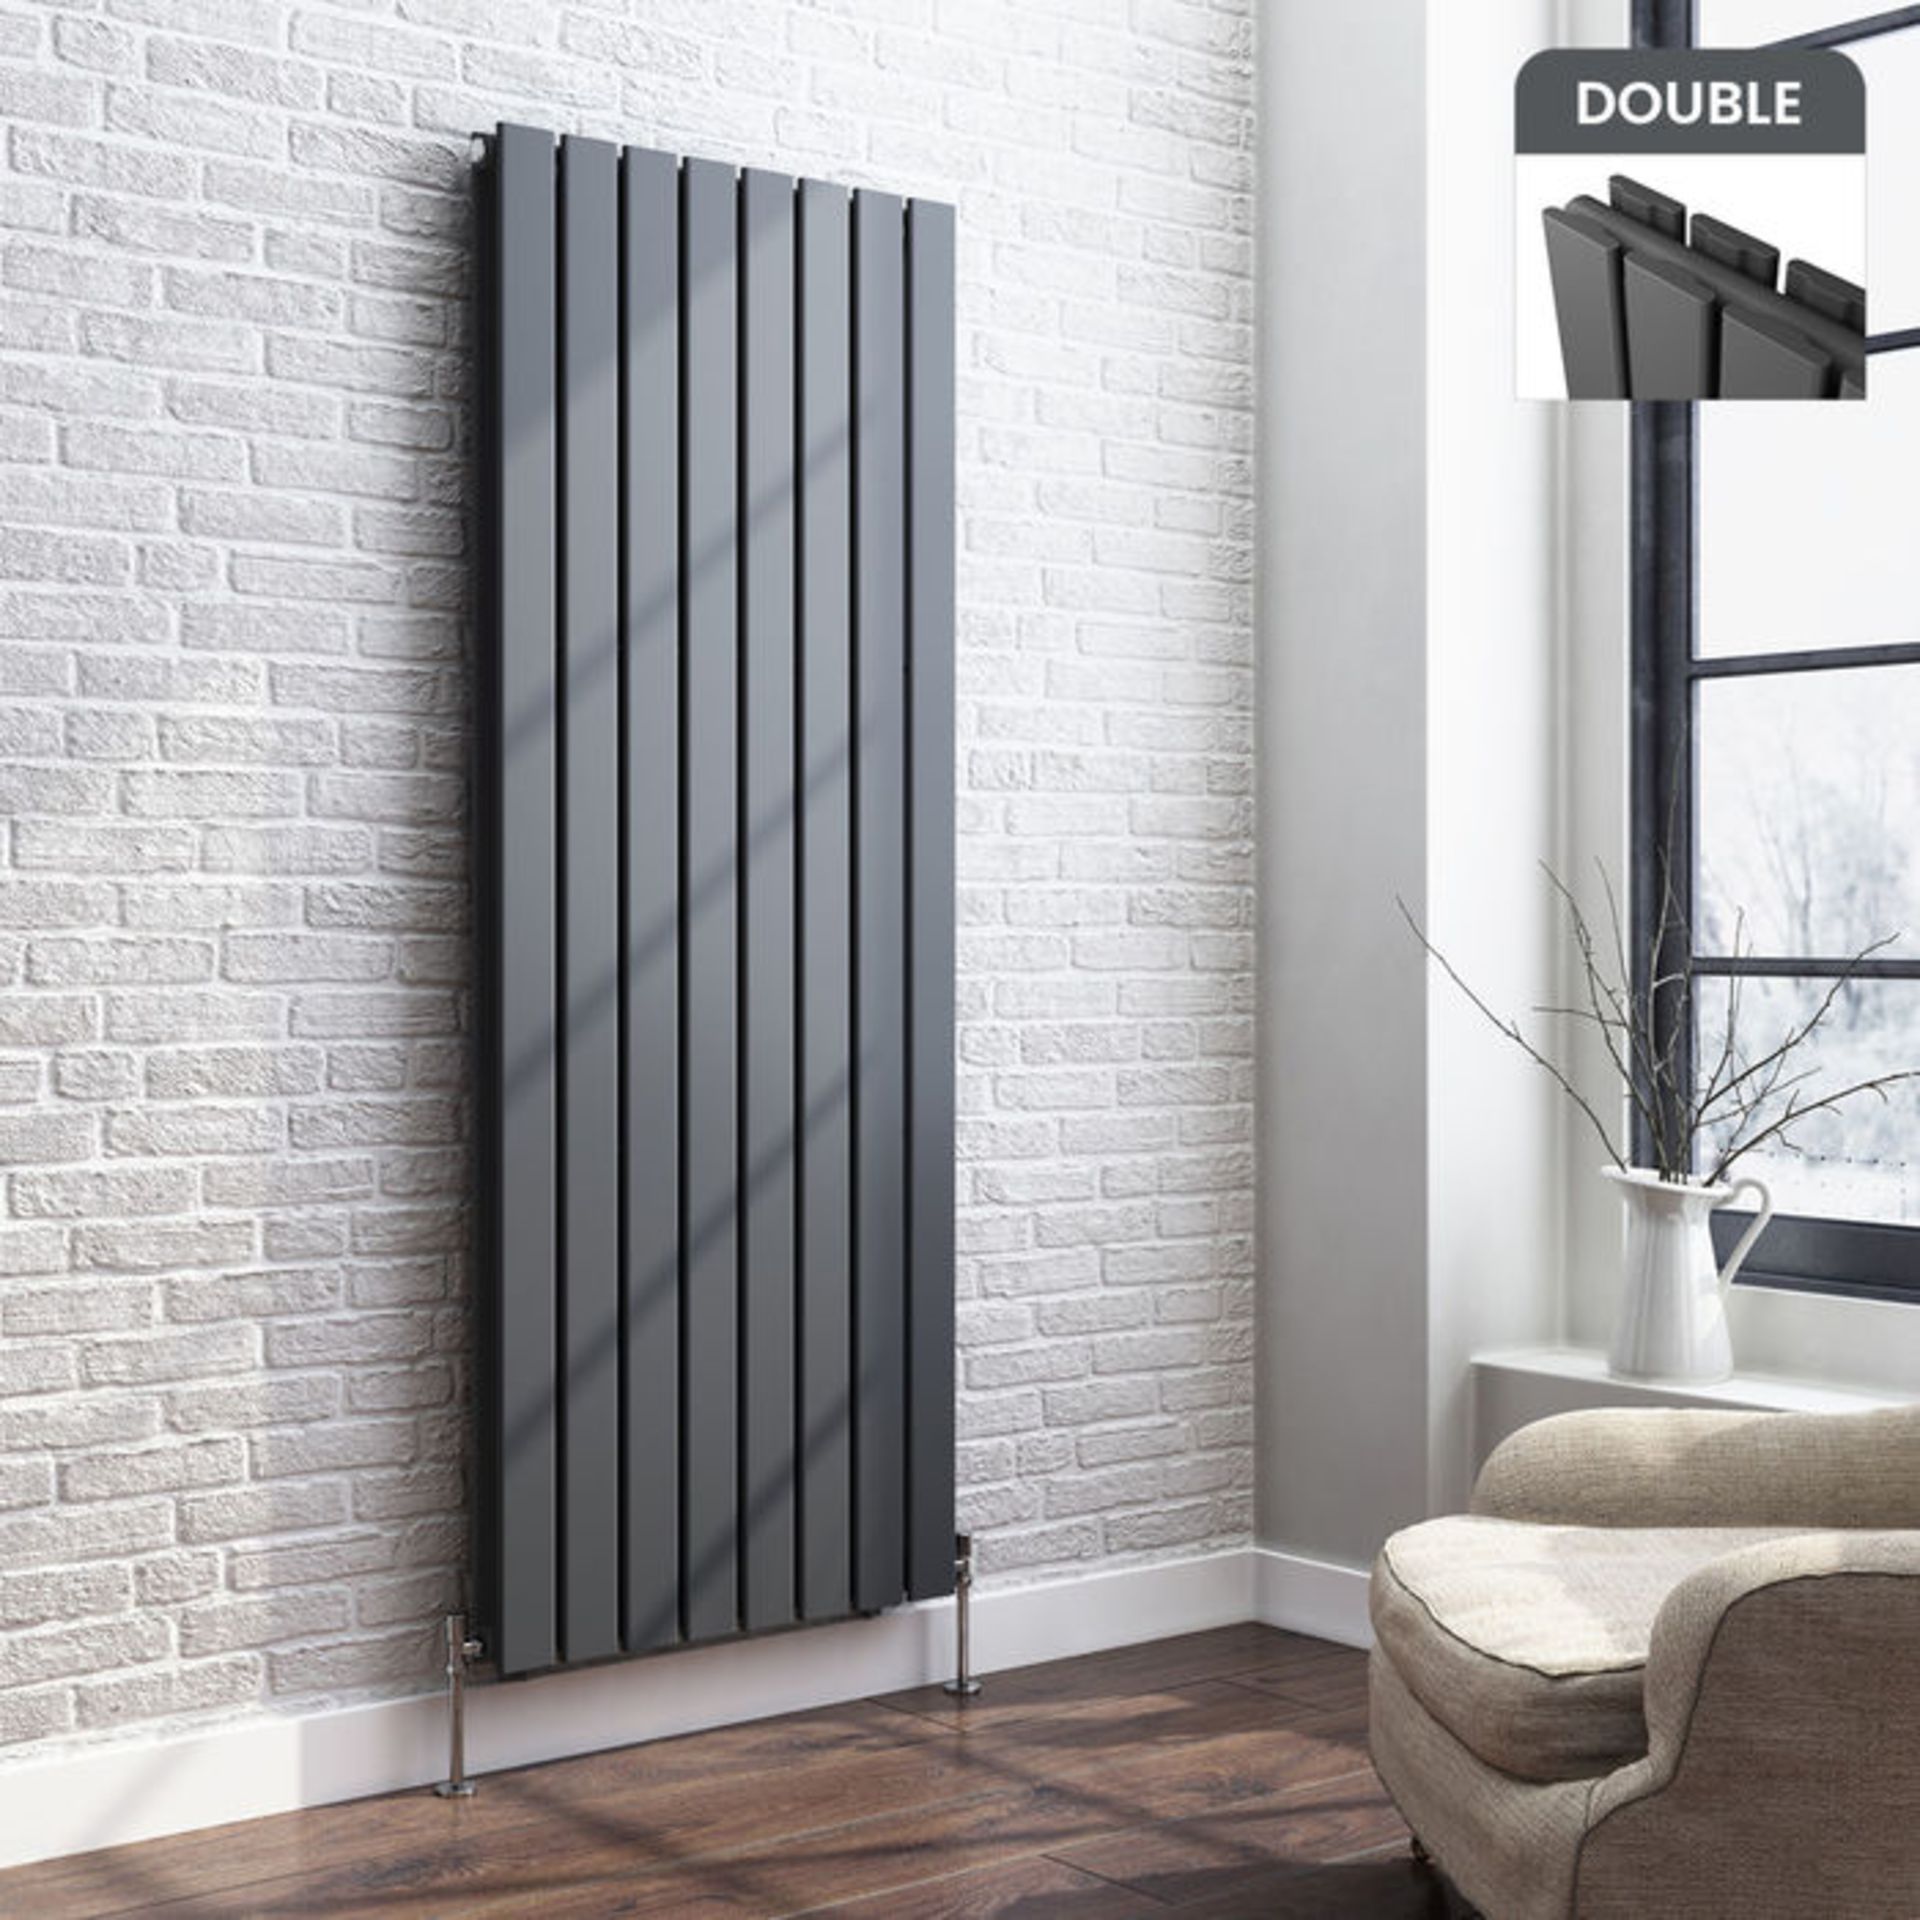 (TA212) 1600x608mm Anthracite Double Flat Panel Vertical Radiator. RRP £474.99. Made from high